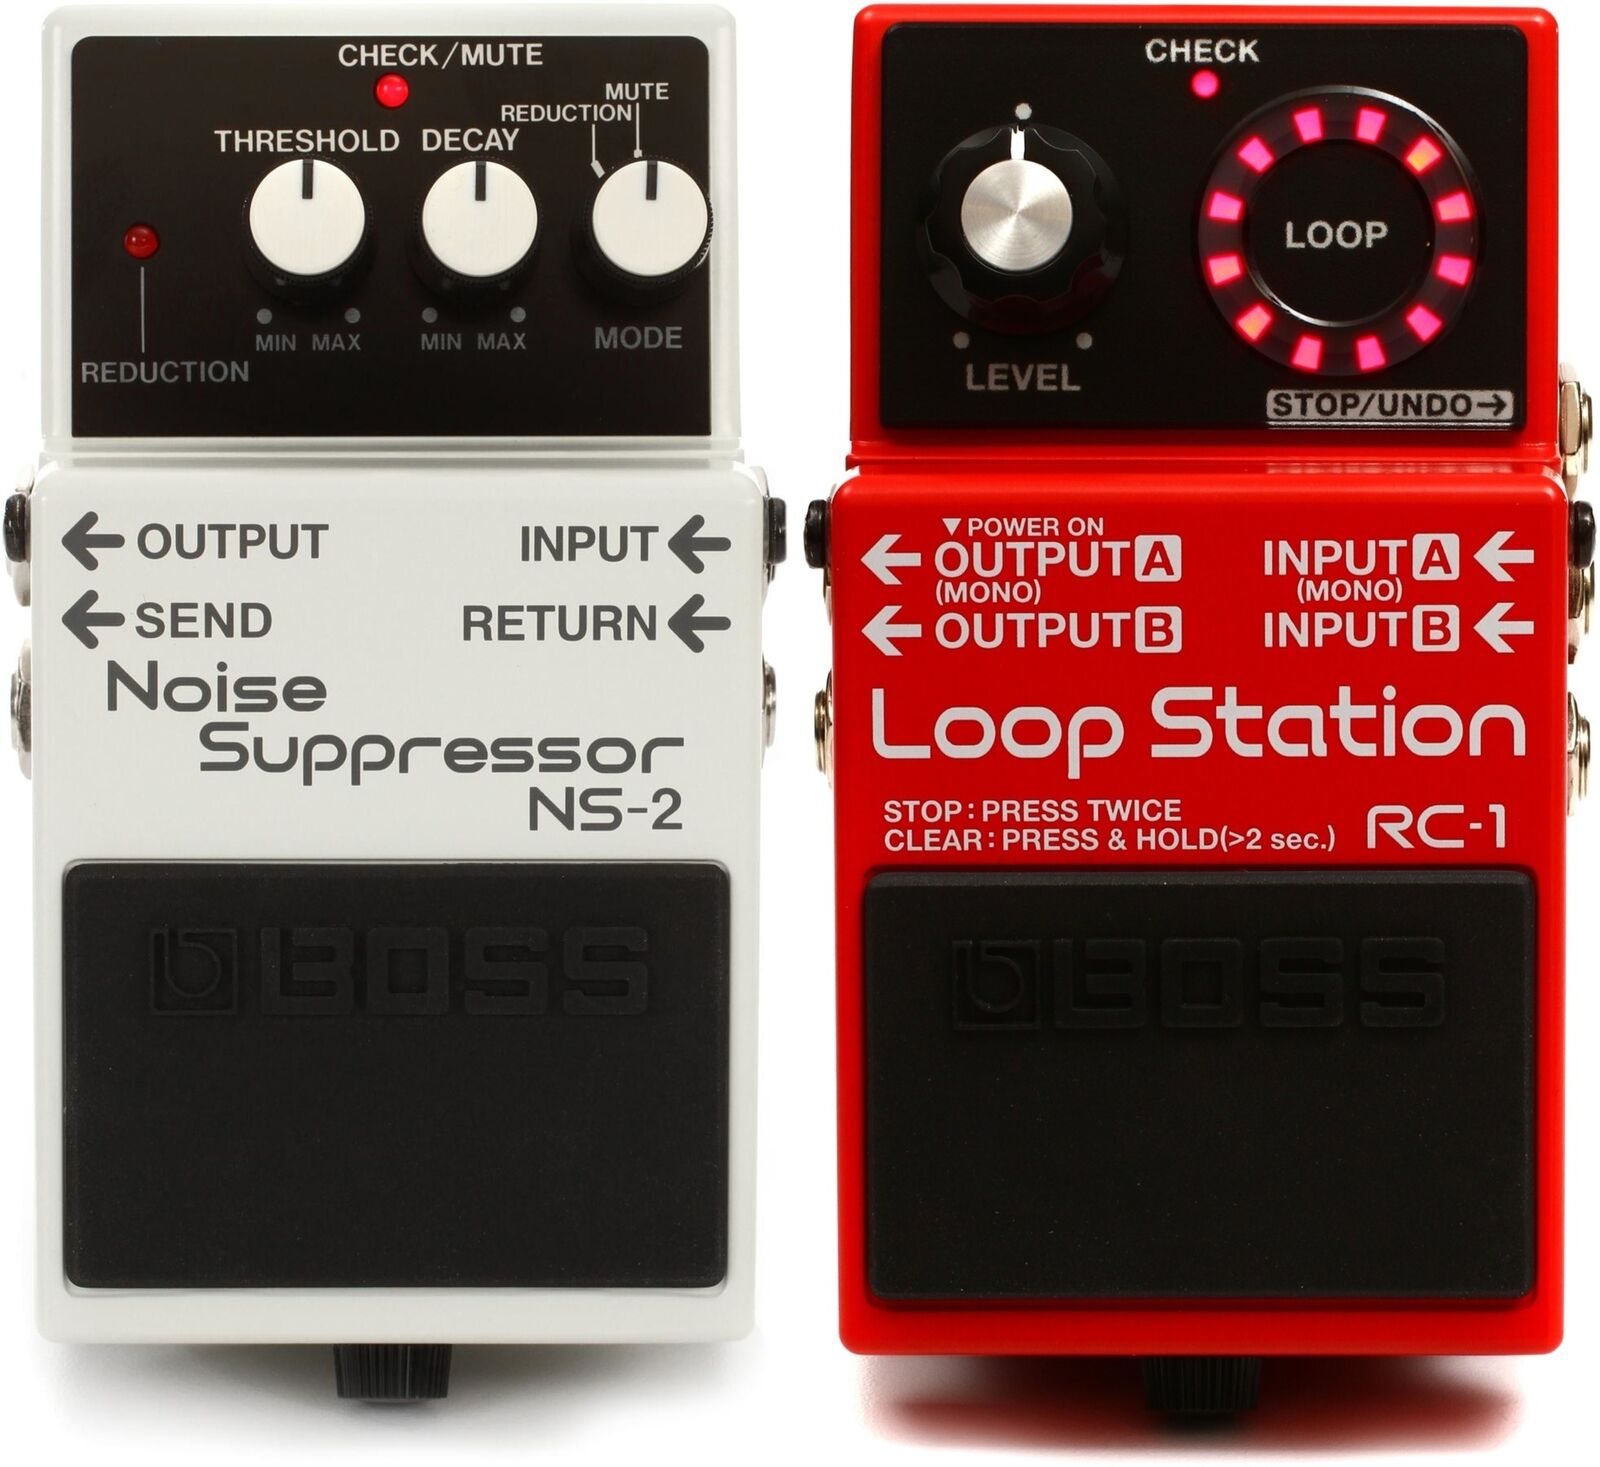 Boss Ns-2 Noise Suppressor Pedal + Boss Rc-1 Loop Station Looper Pedal Value